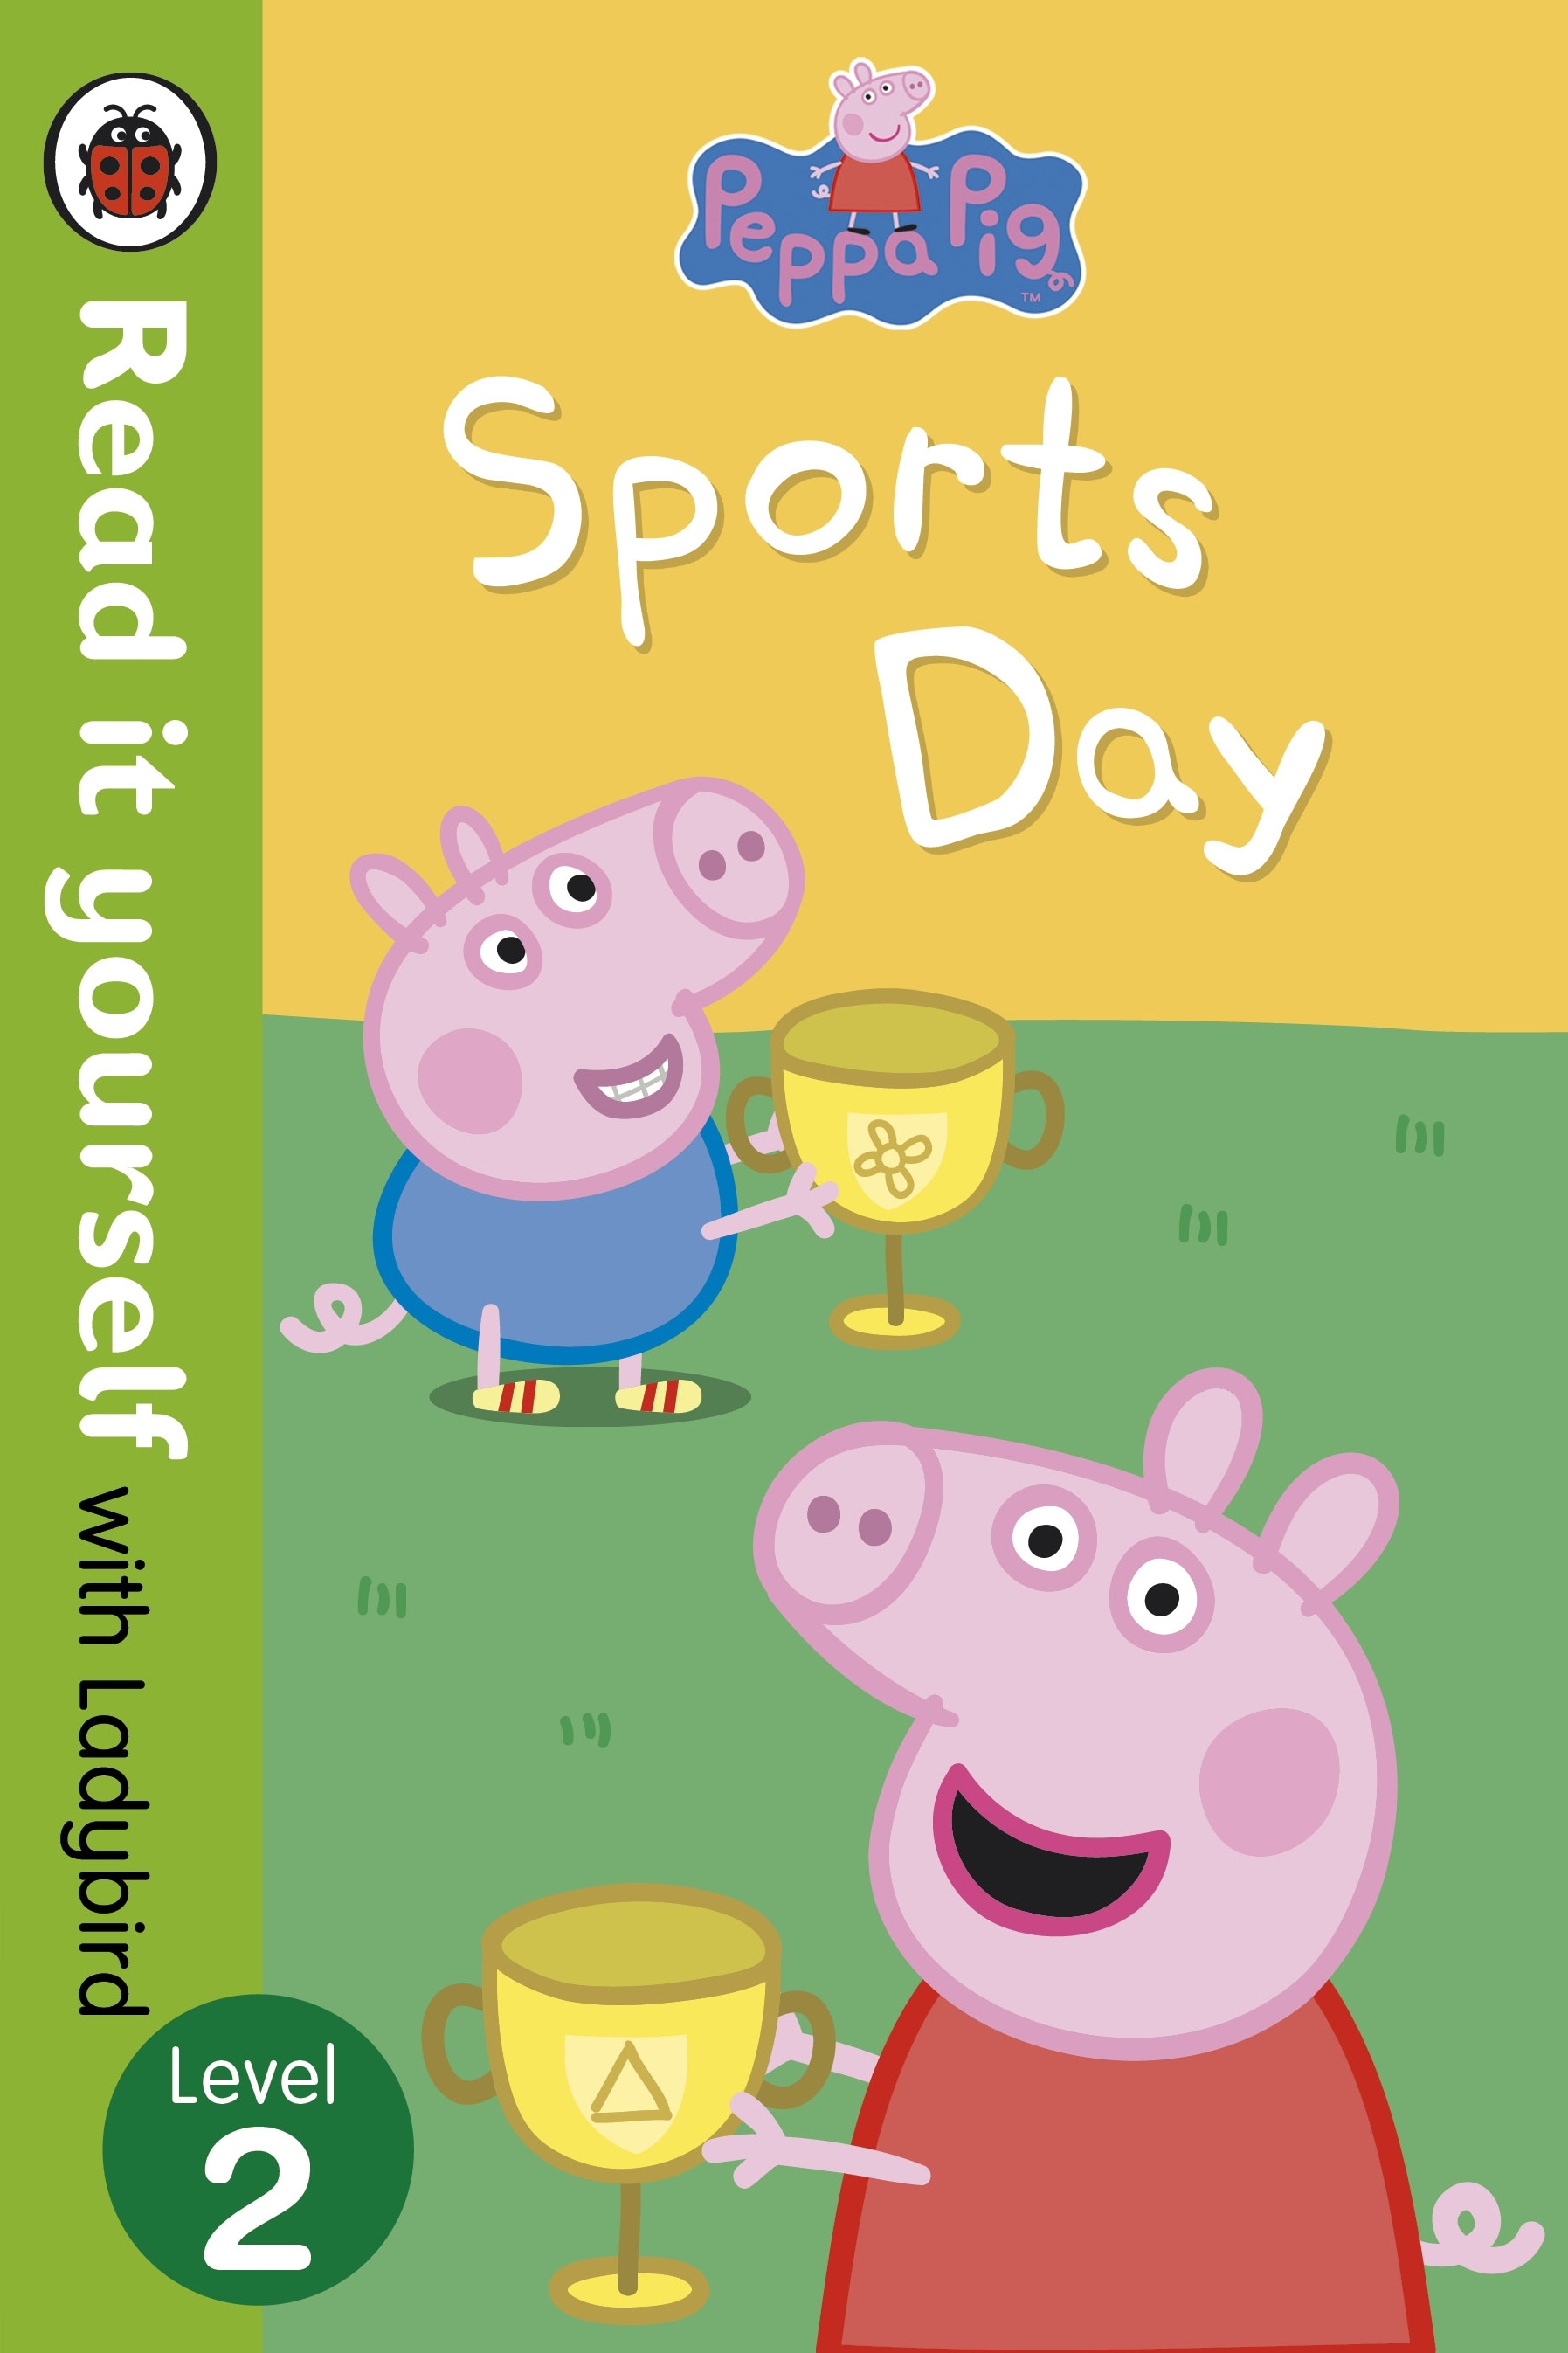 Book “Peppa Pig: Sports Day - Read it yourself with Ladybird” by Ladybird, Peppa Pig — July 4, 2013